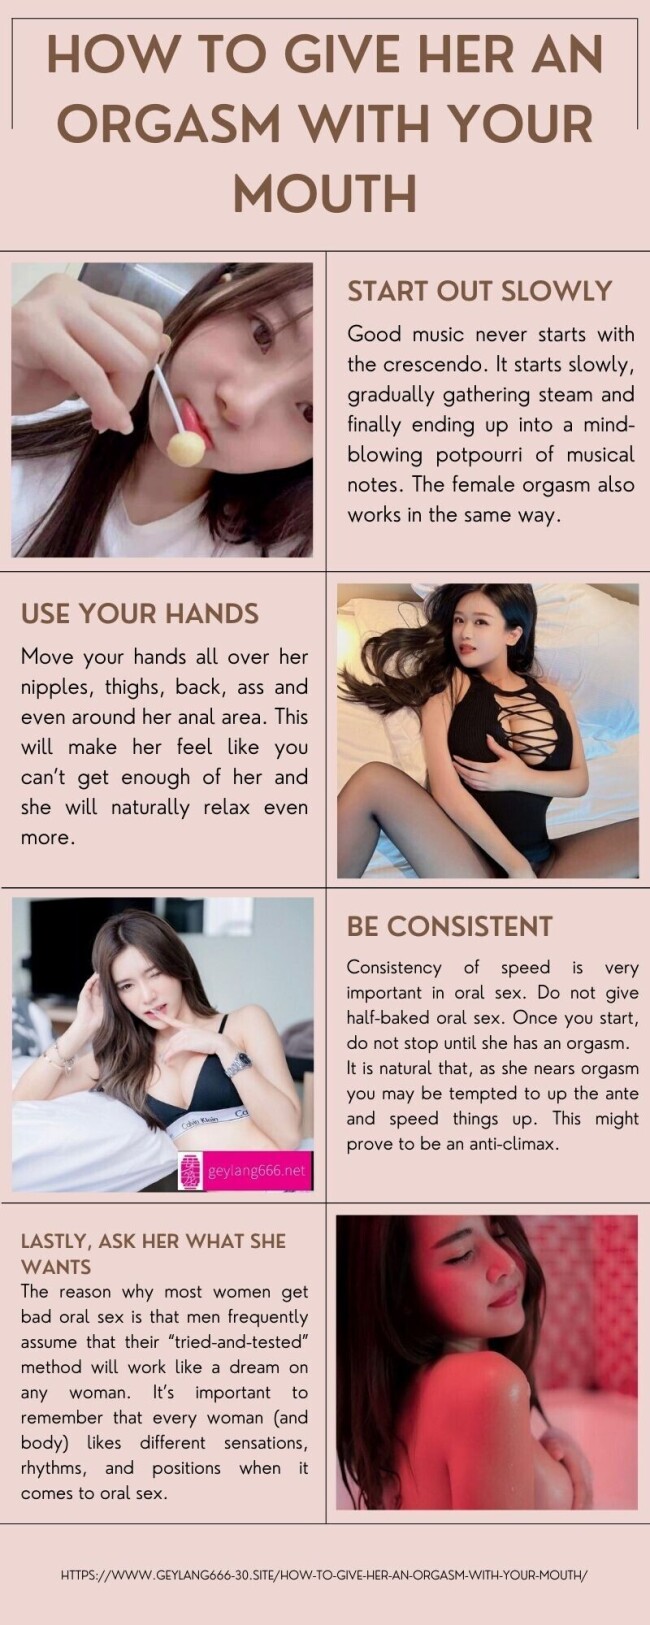 How-to-Give-Her-an-Orgasm-With-Your-Mouth8ad00320464e3e80.jpg